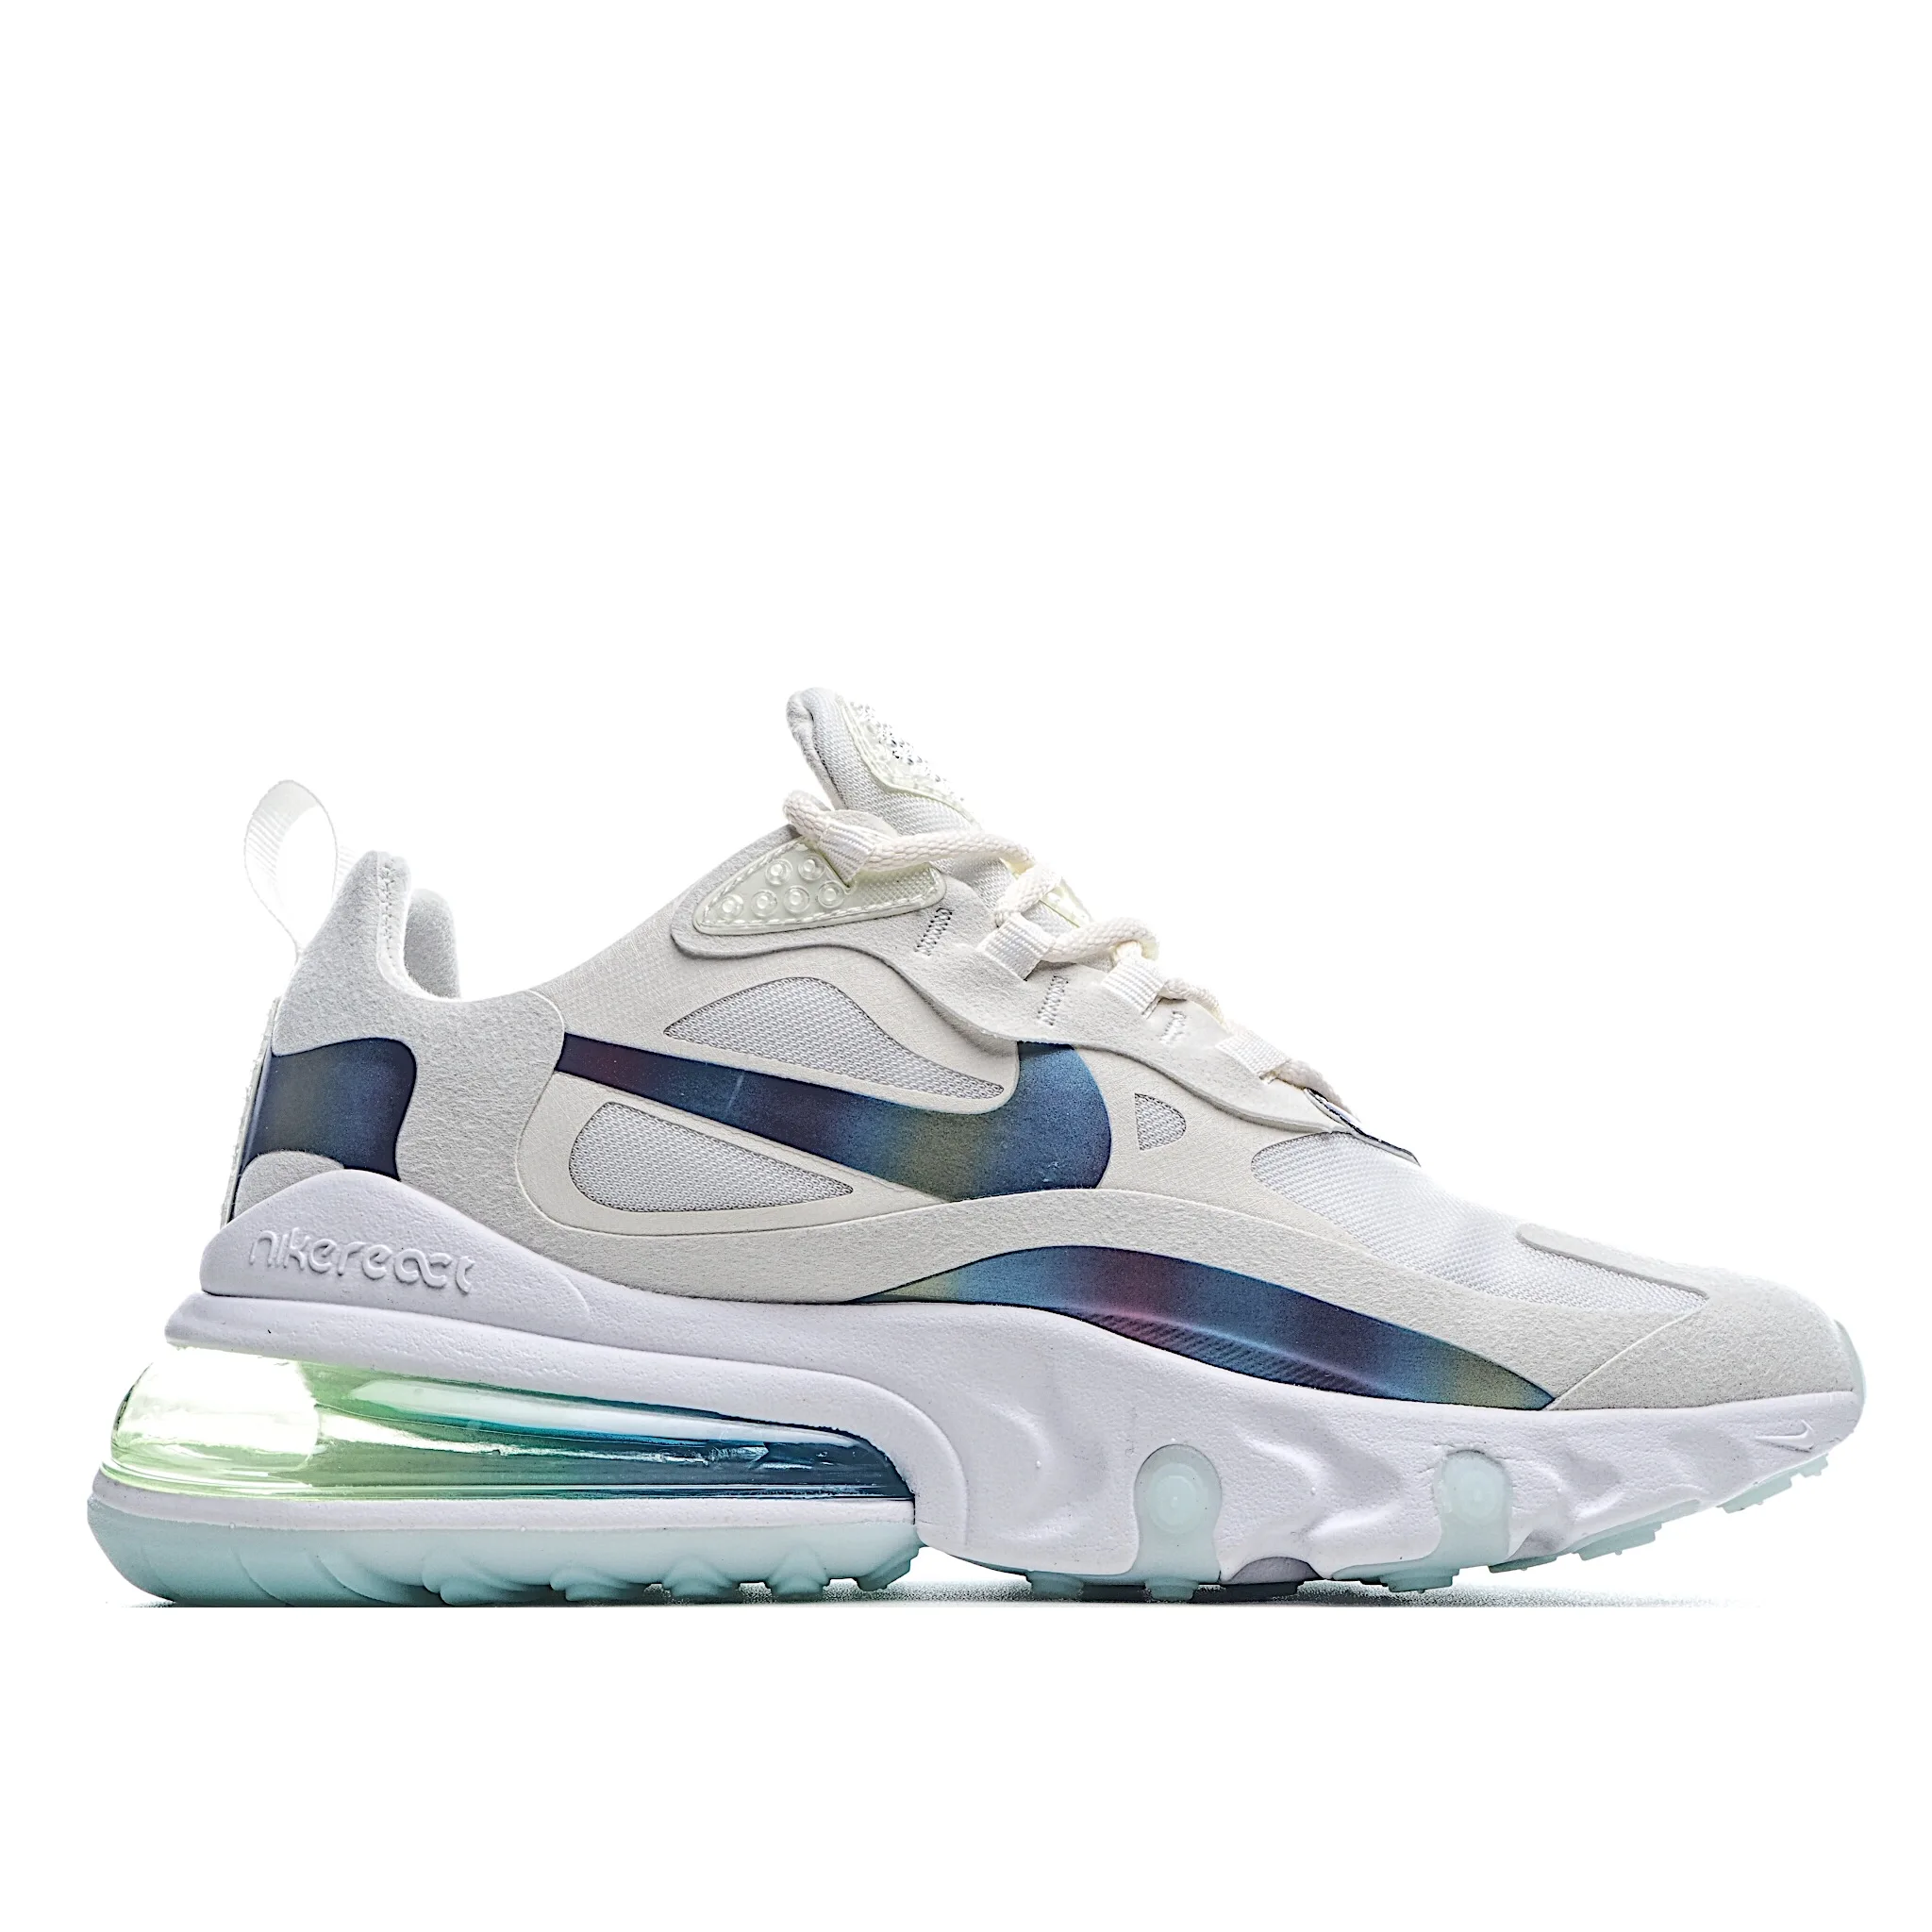 

Air Max 270 React Running Shoes Triple ALL White Women Men Top Quality Summer Gradient 270s Trainers Sneaker size 36-47